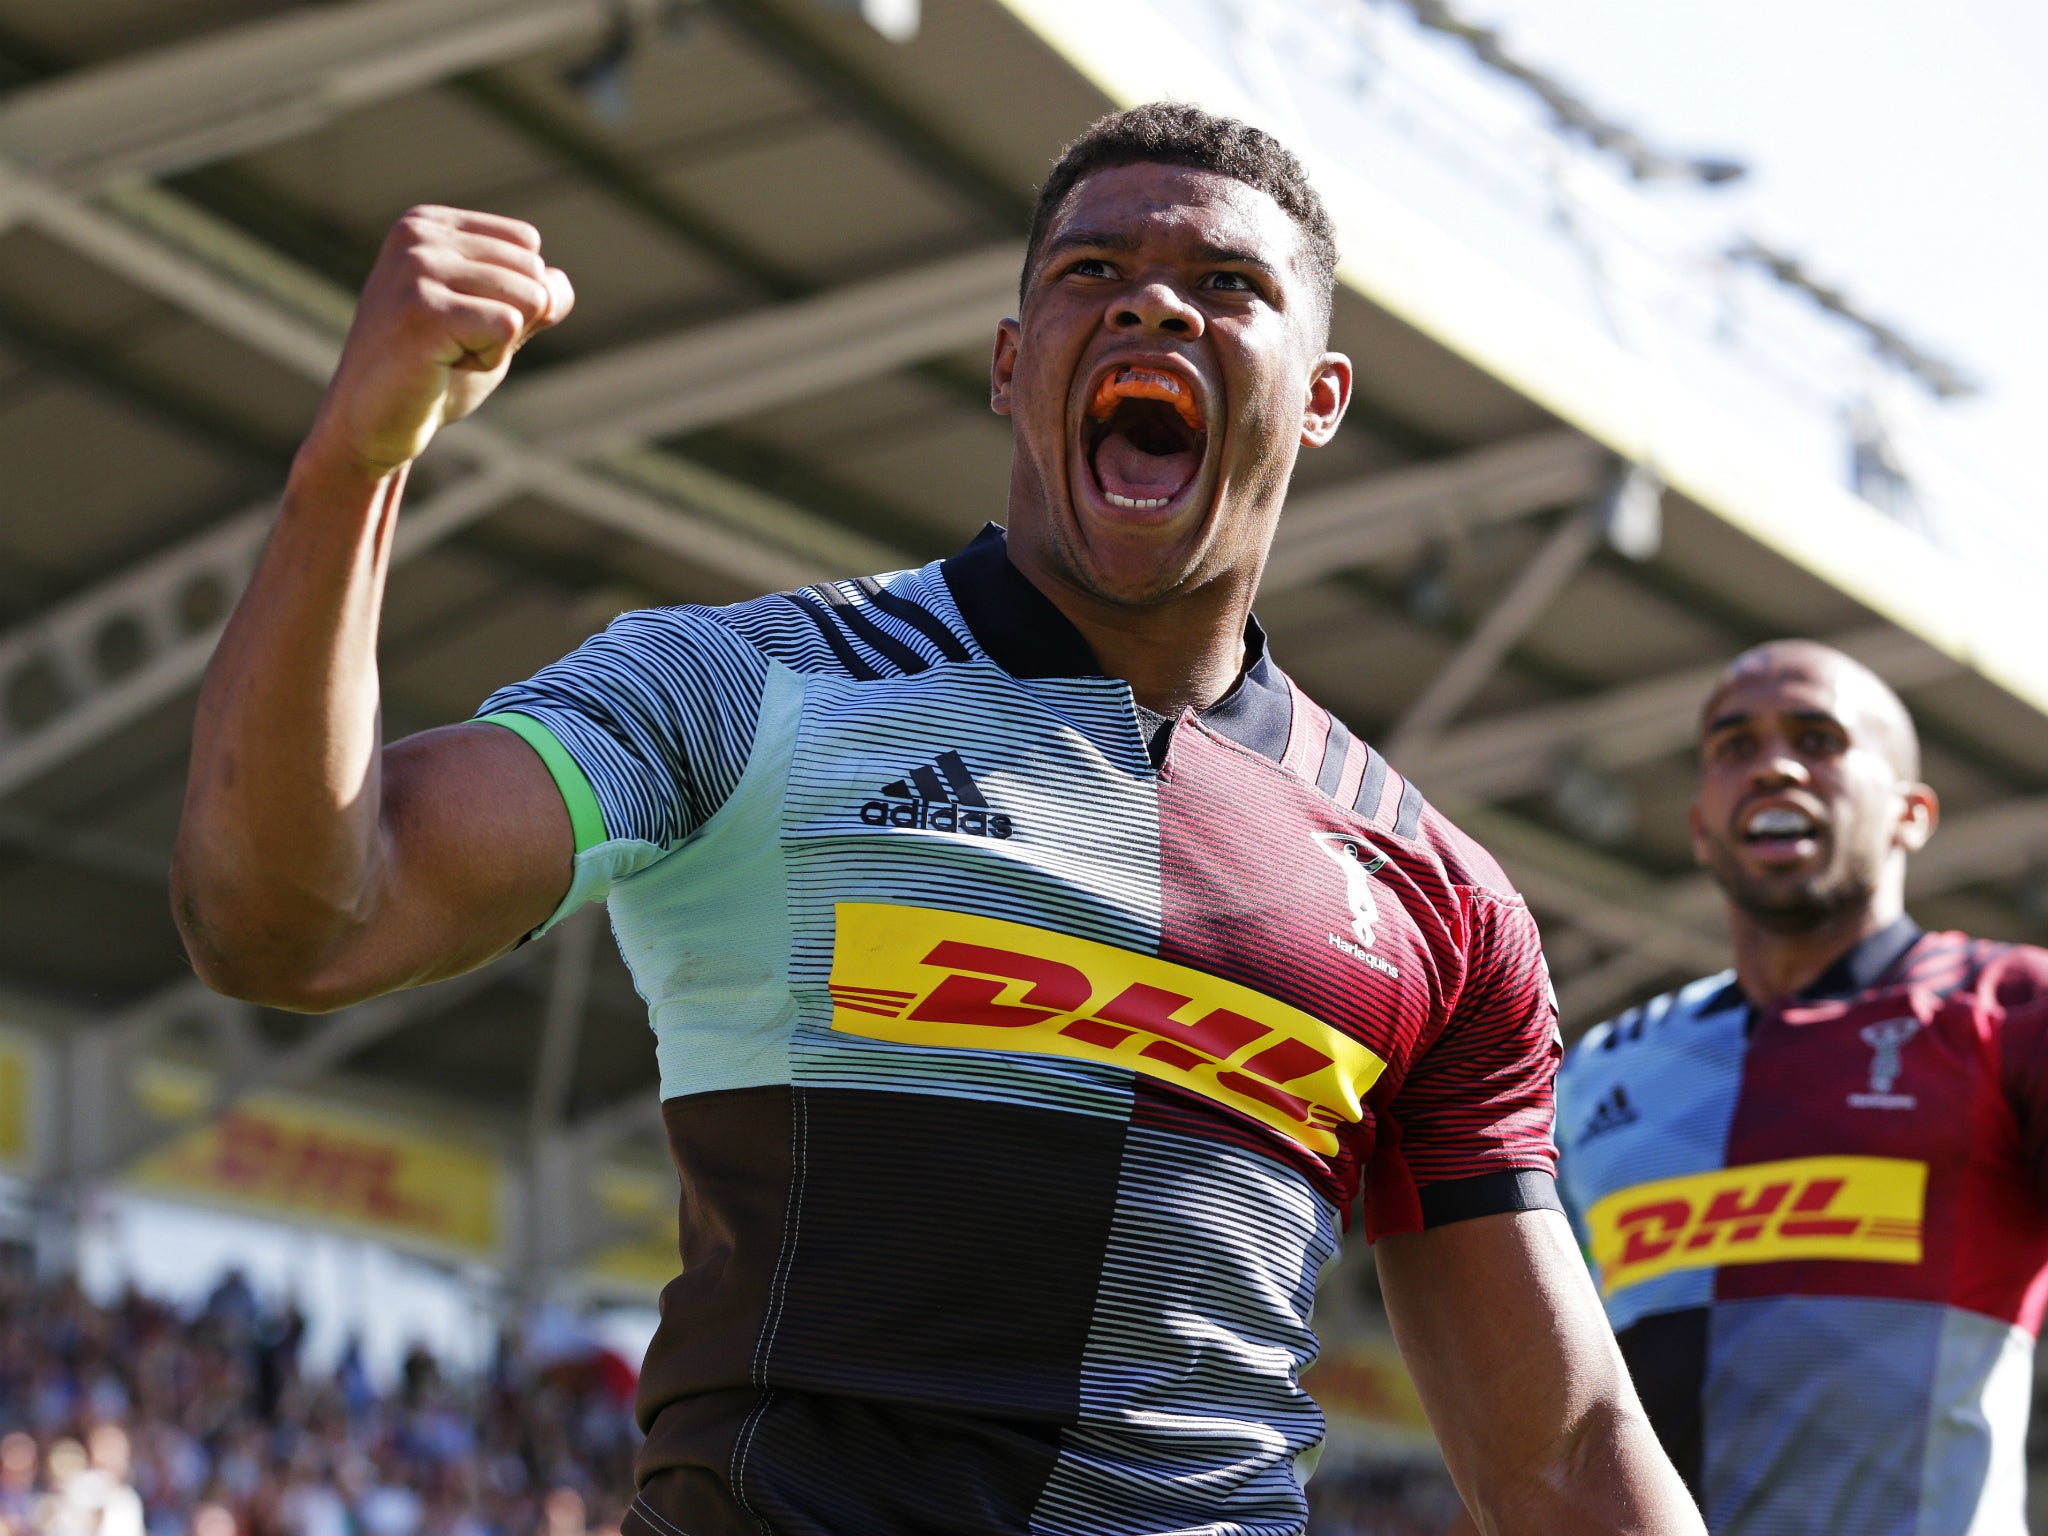 Nathan Earle celebrates scoring a try on his Harlequins debut in the win over Sale Sharks